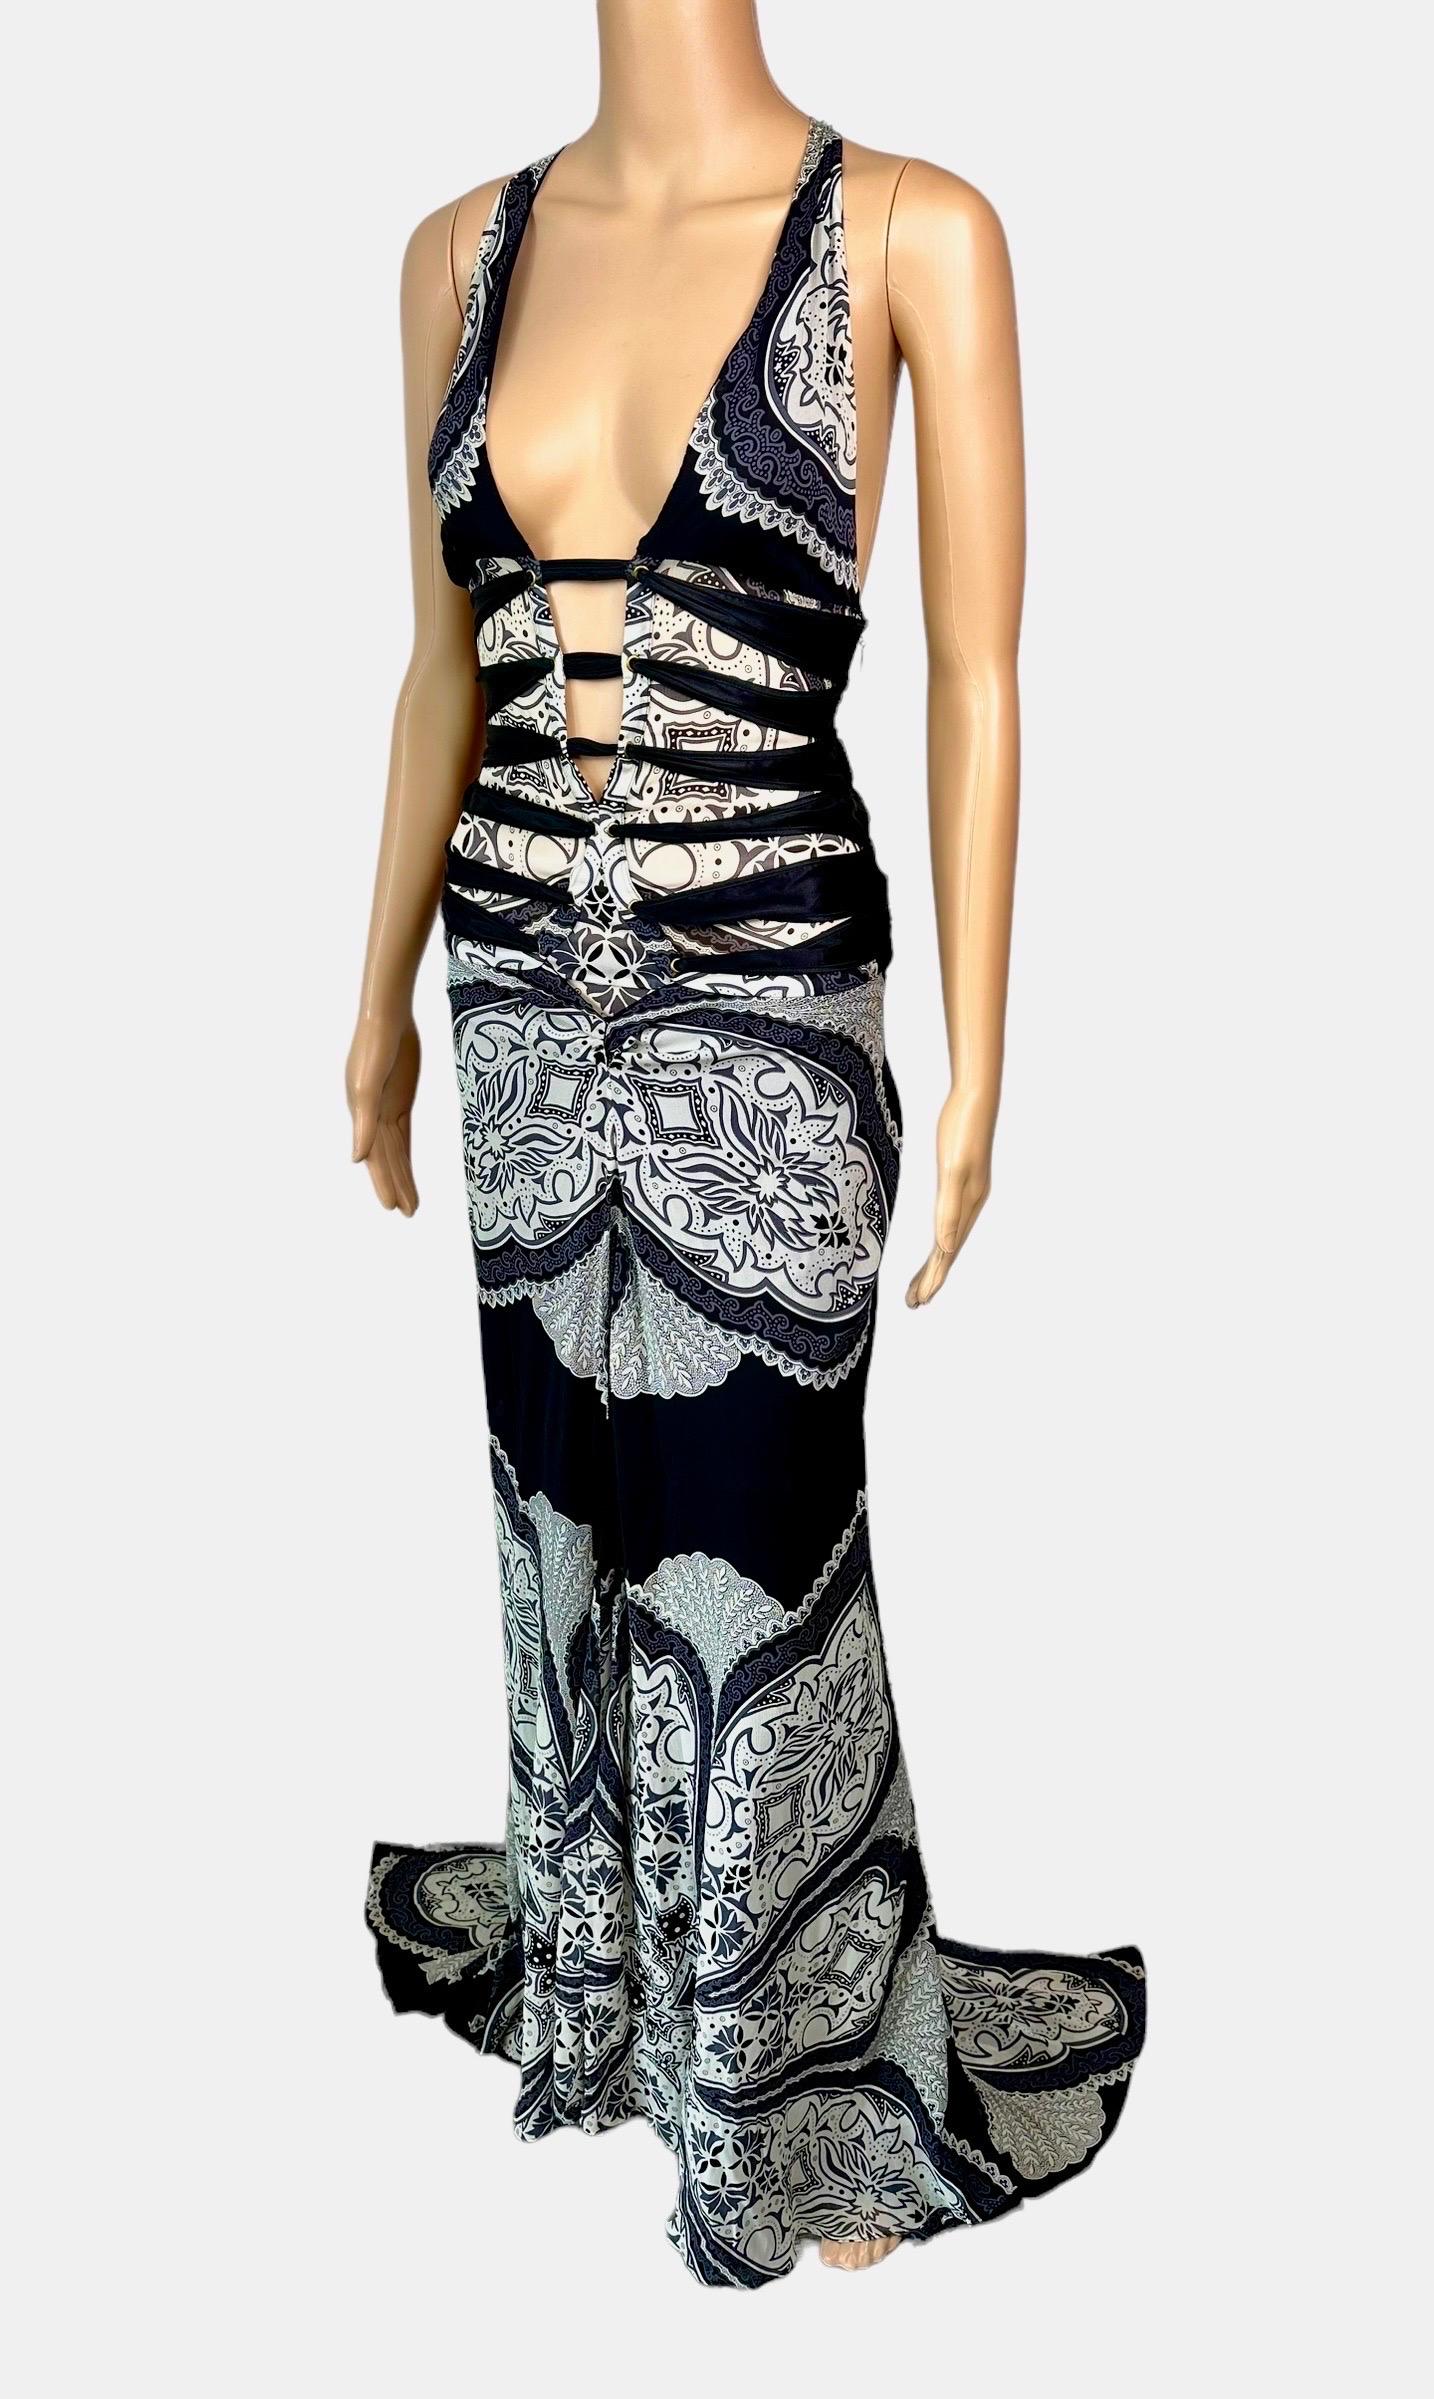 Tom Ford for Gucci Cruise 2004 Plunging Cutout Strappy Silk Evening Dress Gown 6